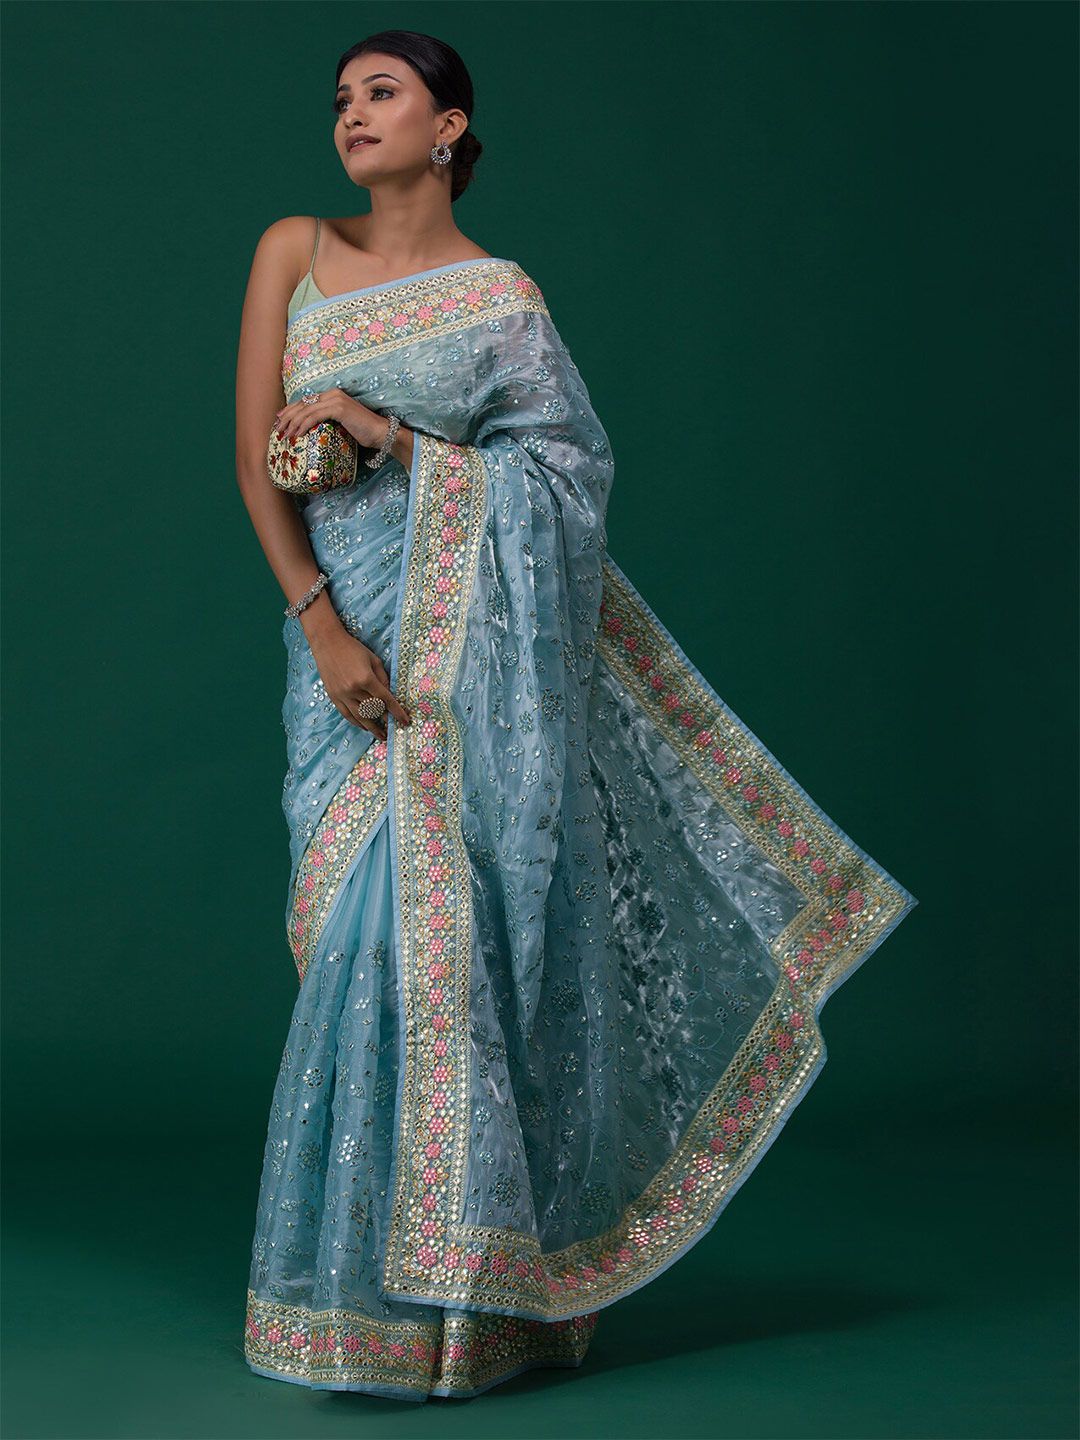 Koskii Blue & Pink Floral Embroidered Tissue Saree Price in India